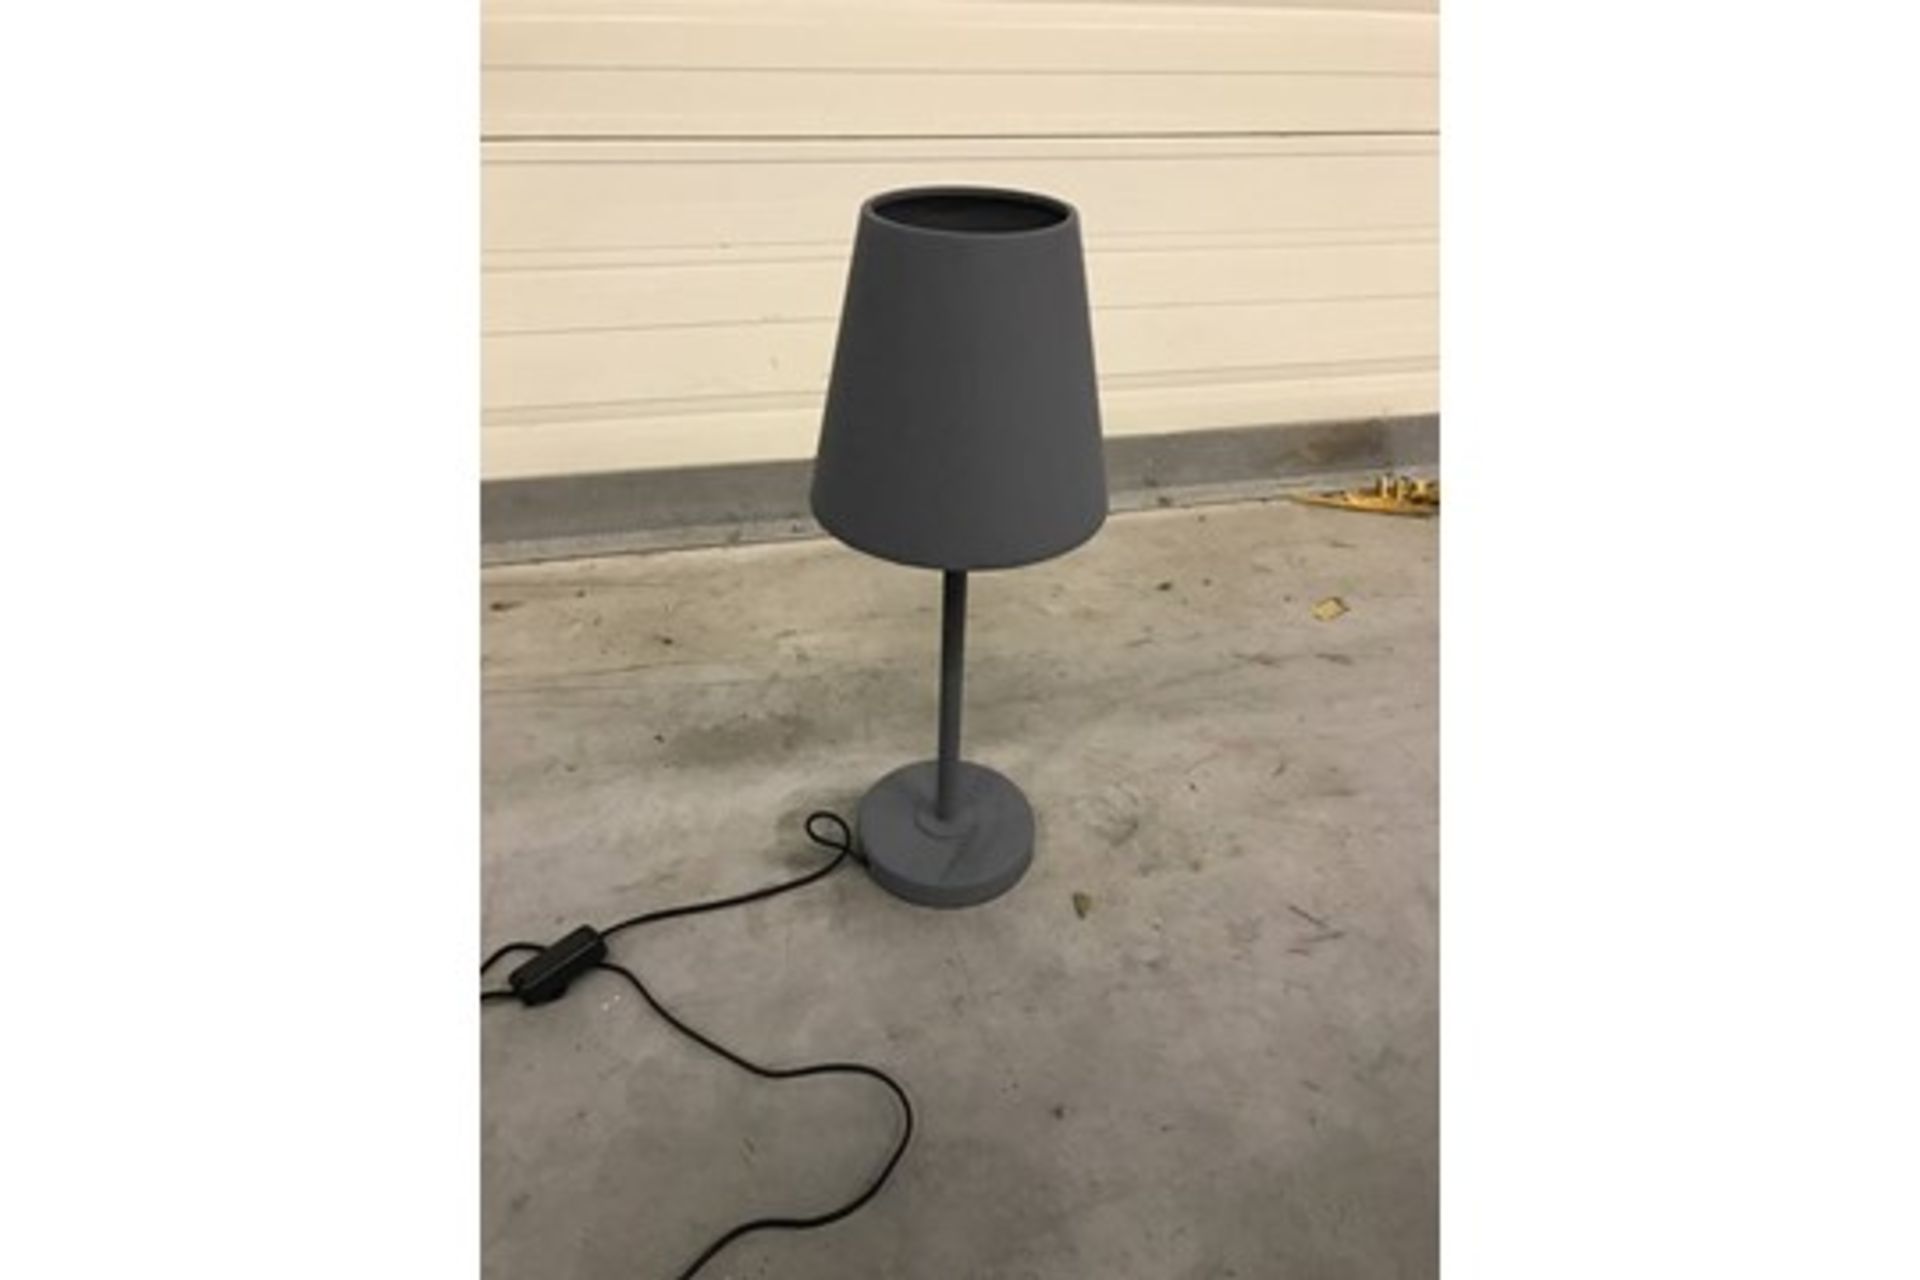 Contemporary Metal Table Lamp (EU) Grey Metal The Slim Stem Like The Trunk Of A Tree, Its Shade Is A